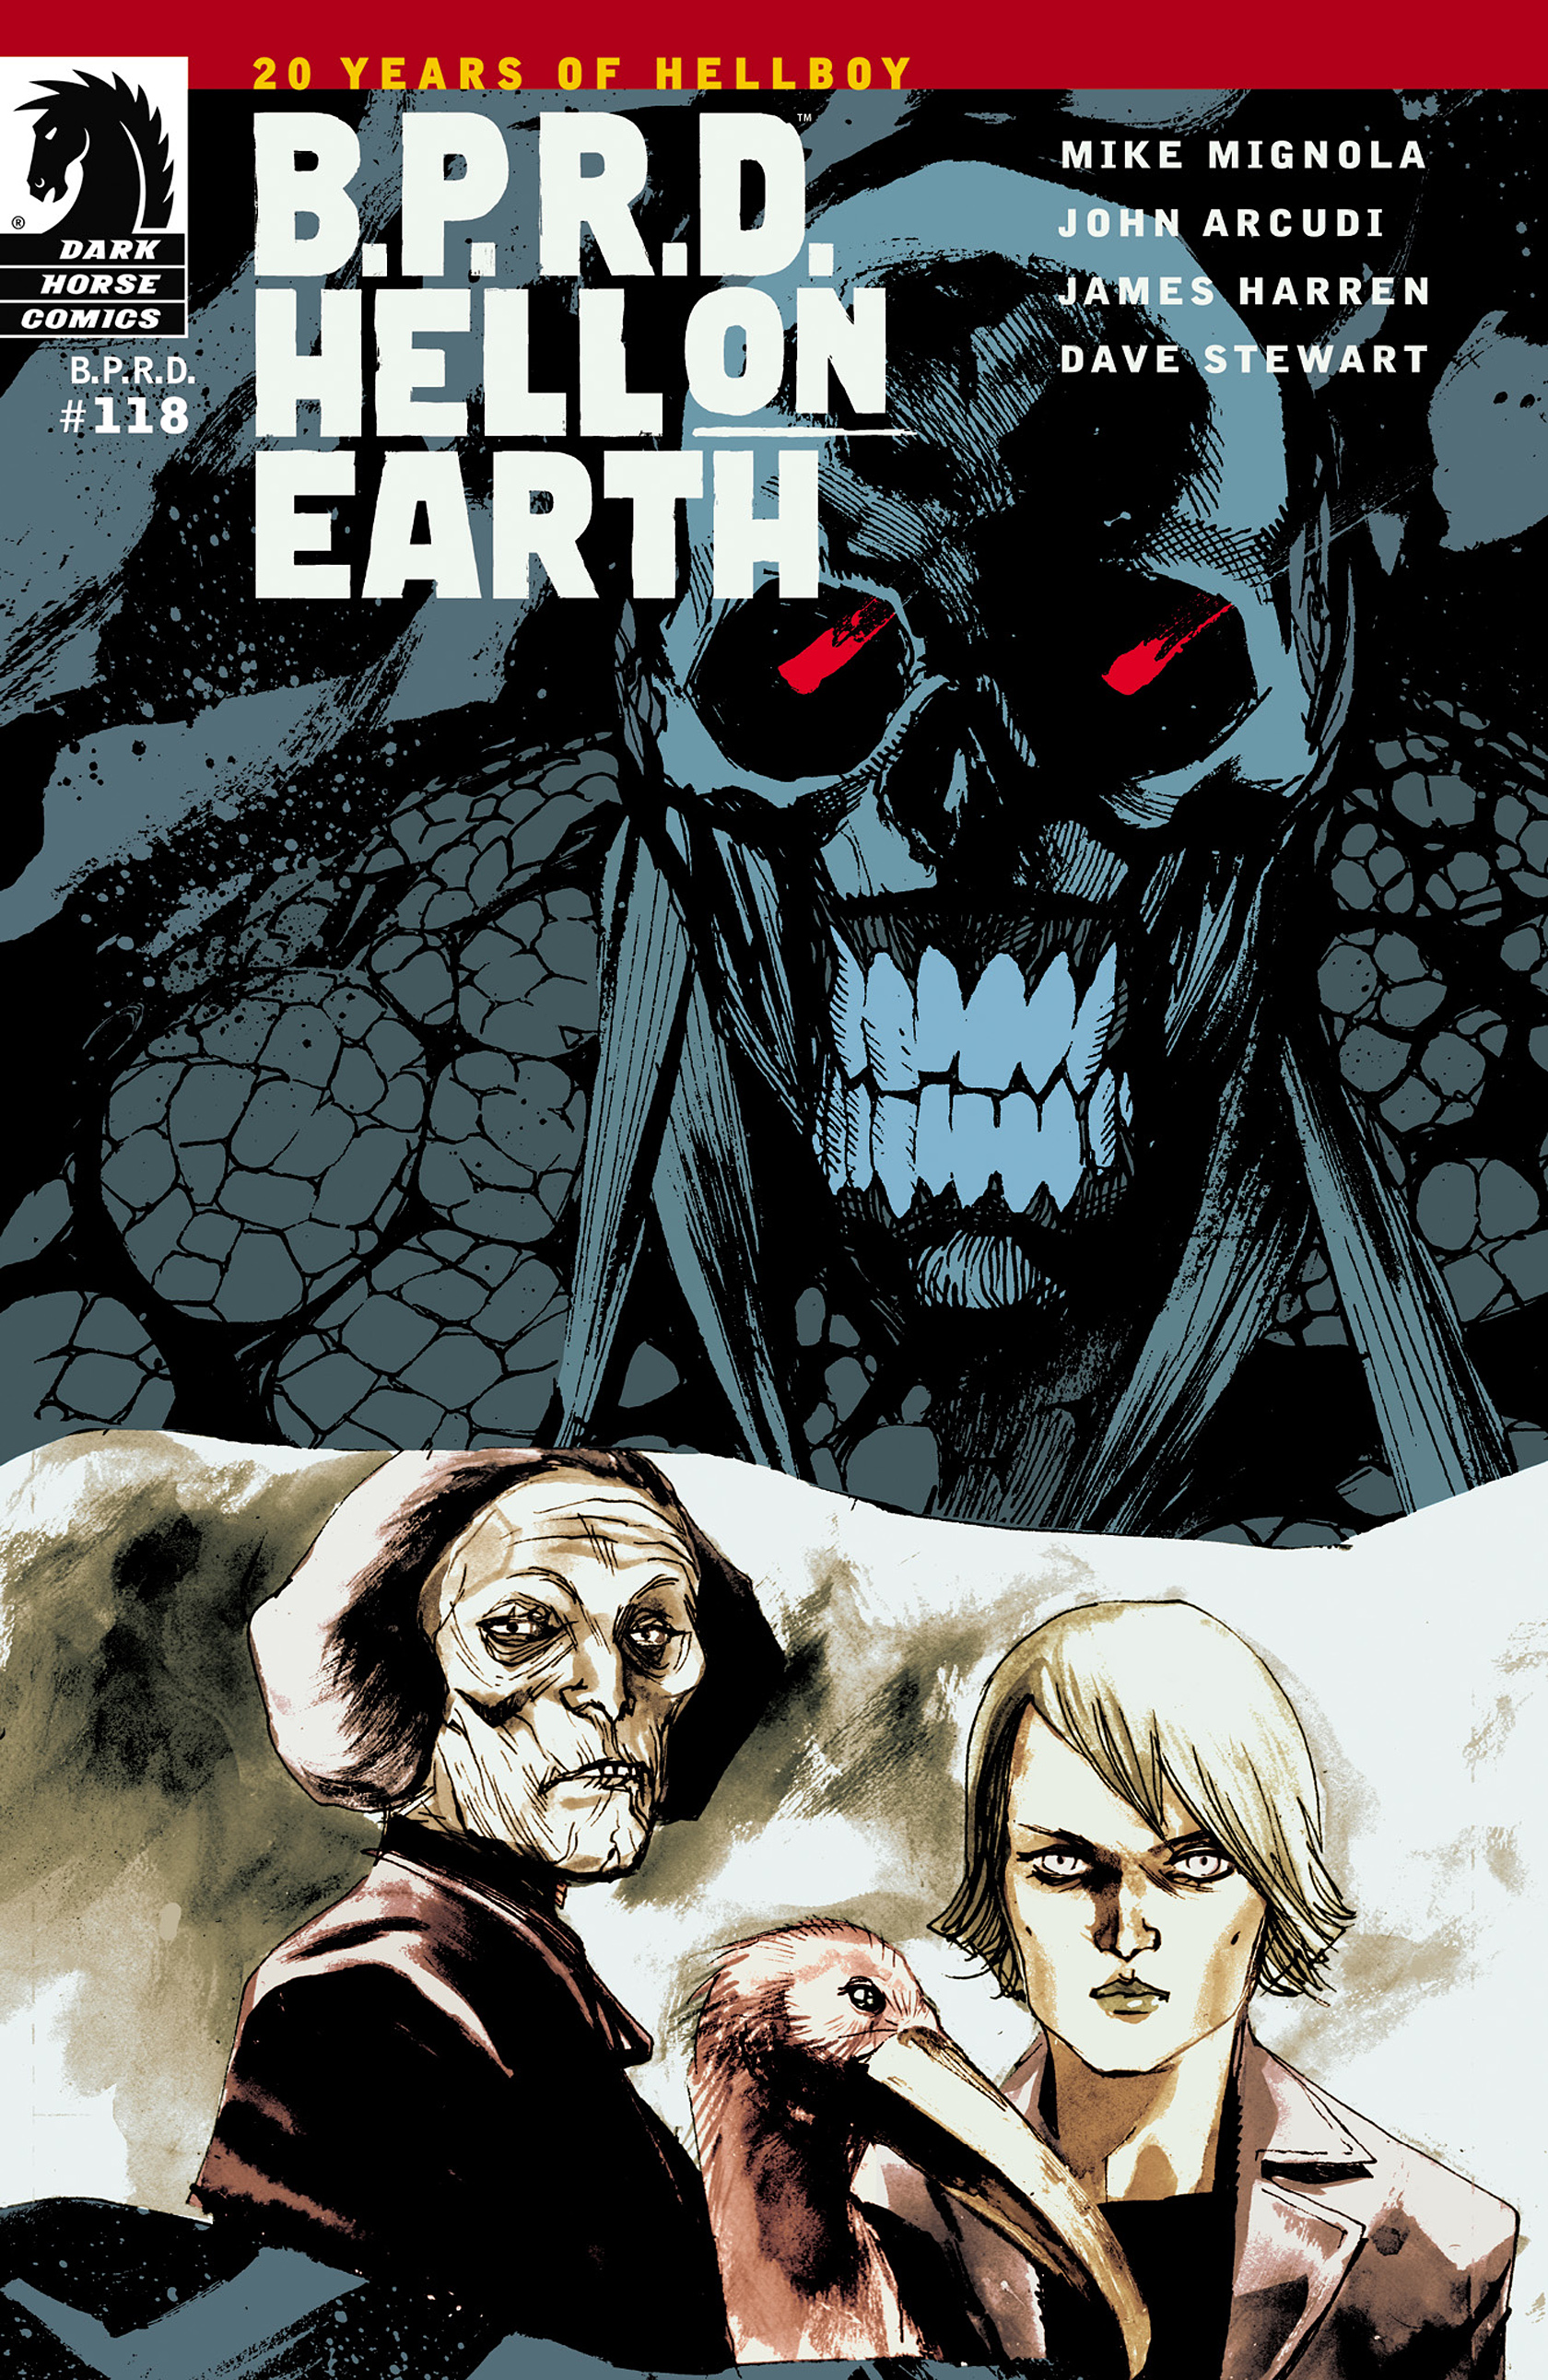 B.P.R.D. Hell On Earth #7